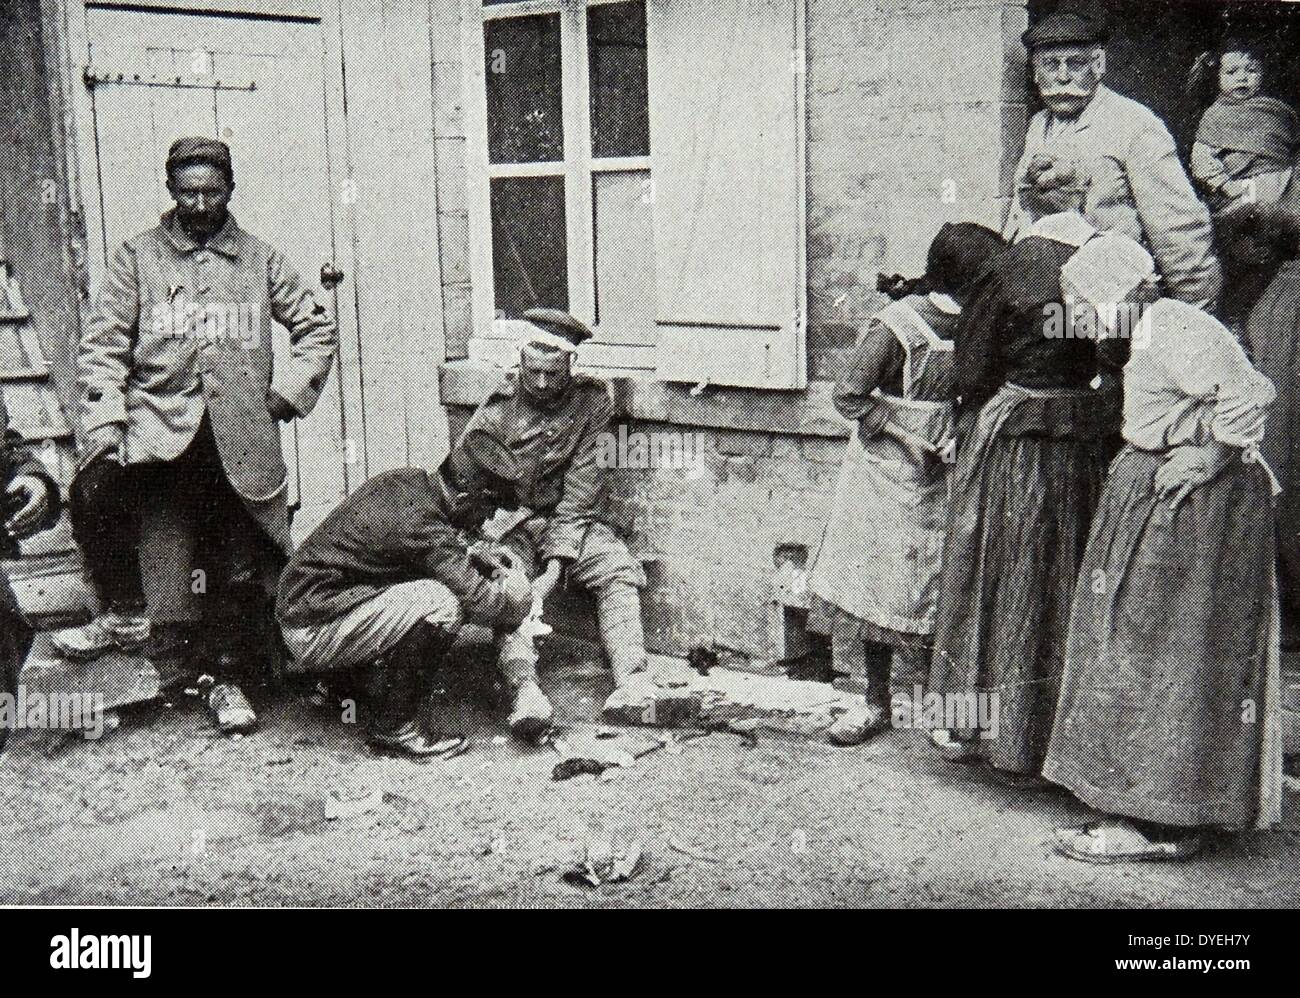 World War 1 - A major nursing a wounded German as villagers look with curiosity 1915 Stock Photo